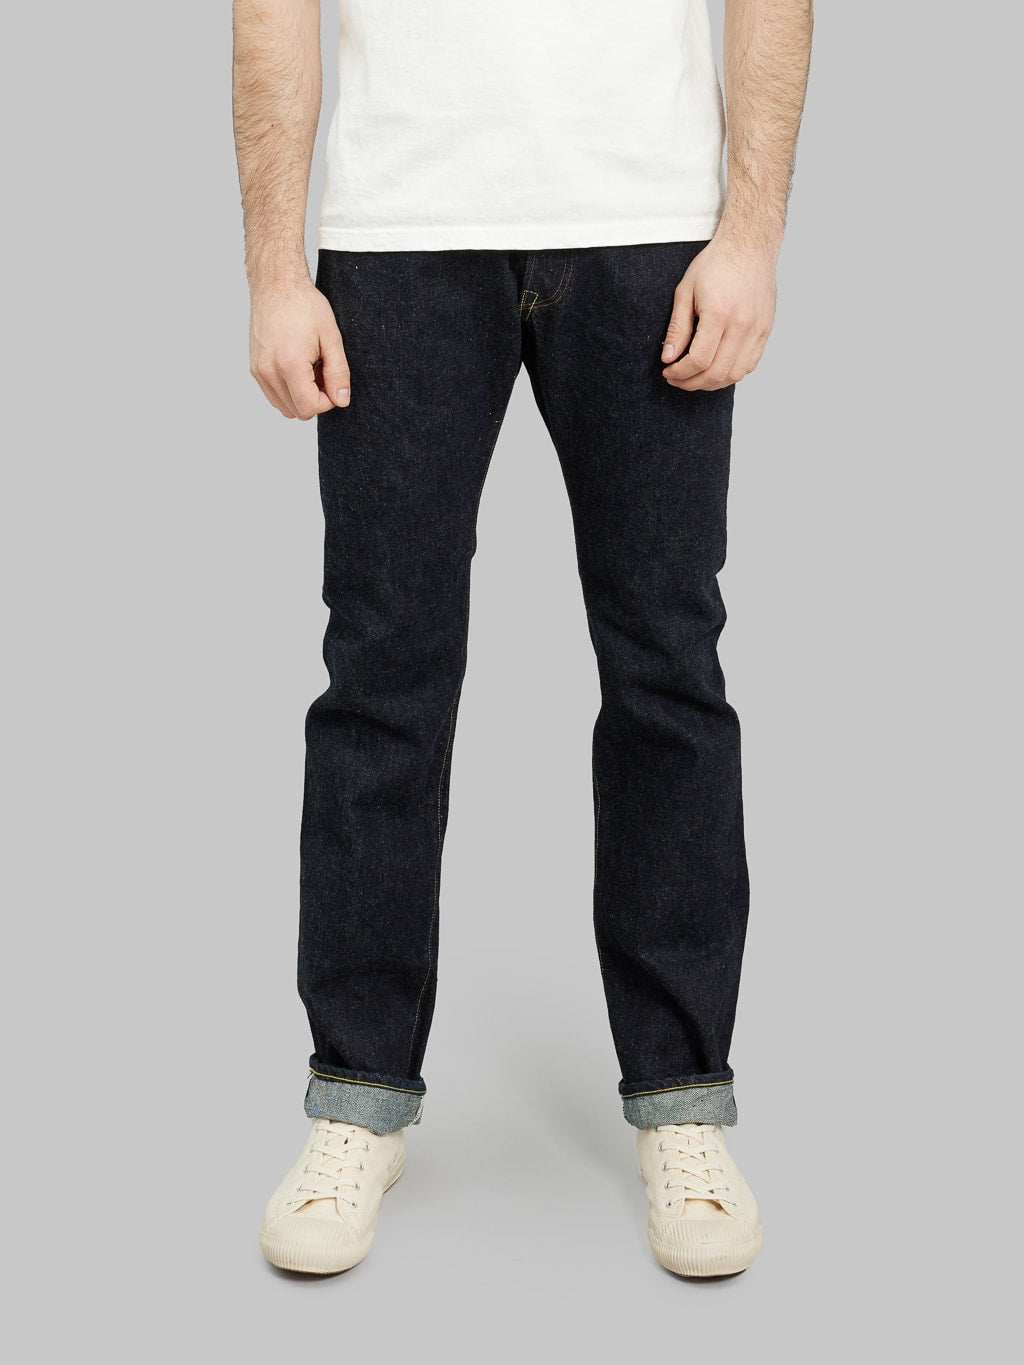 Fob factory slim straight denim jeans front fit